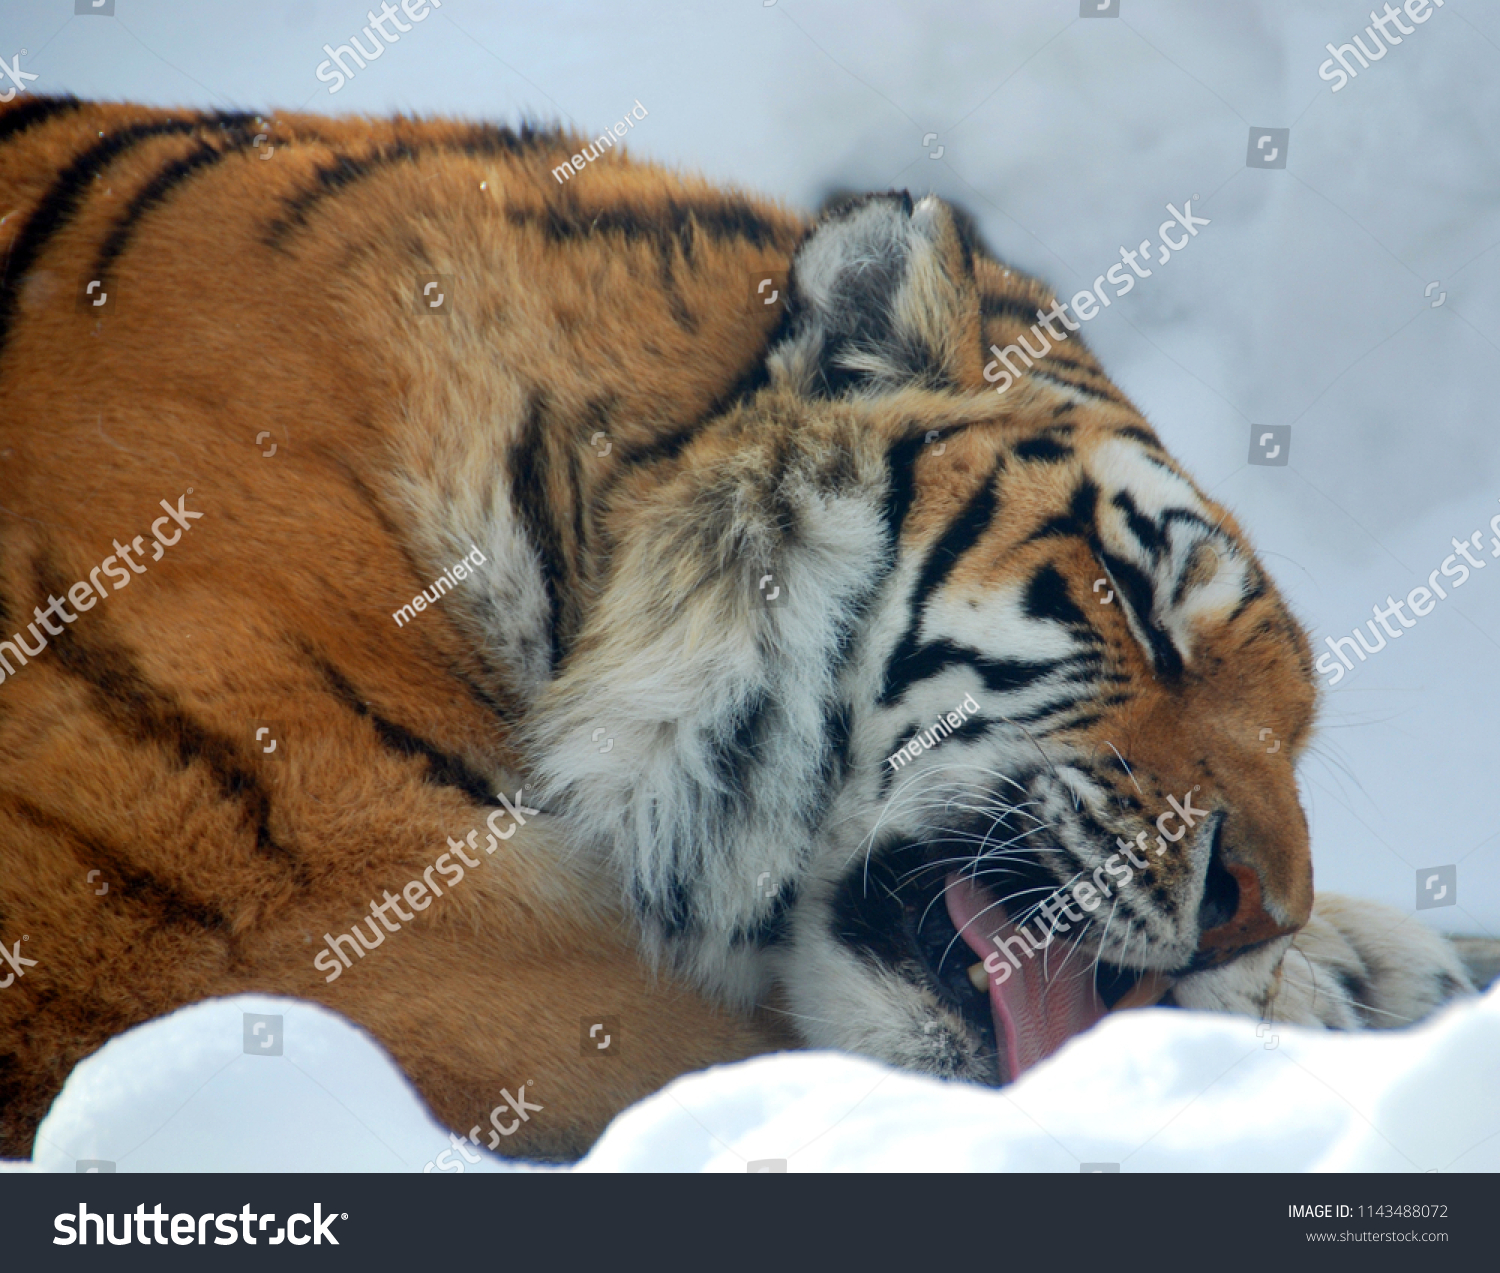 Tiger close up: The tiger (Panthera tigris) is the largest cat species. It is the third largest land carnivore (behind only the polar bear and the brown bear). #1143488072